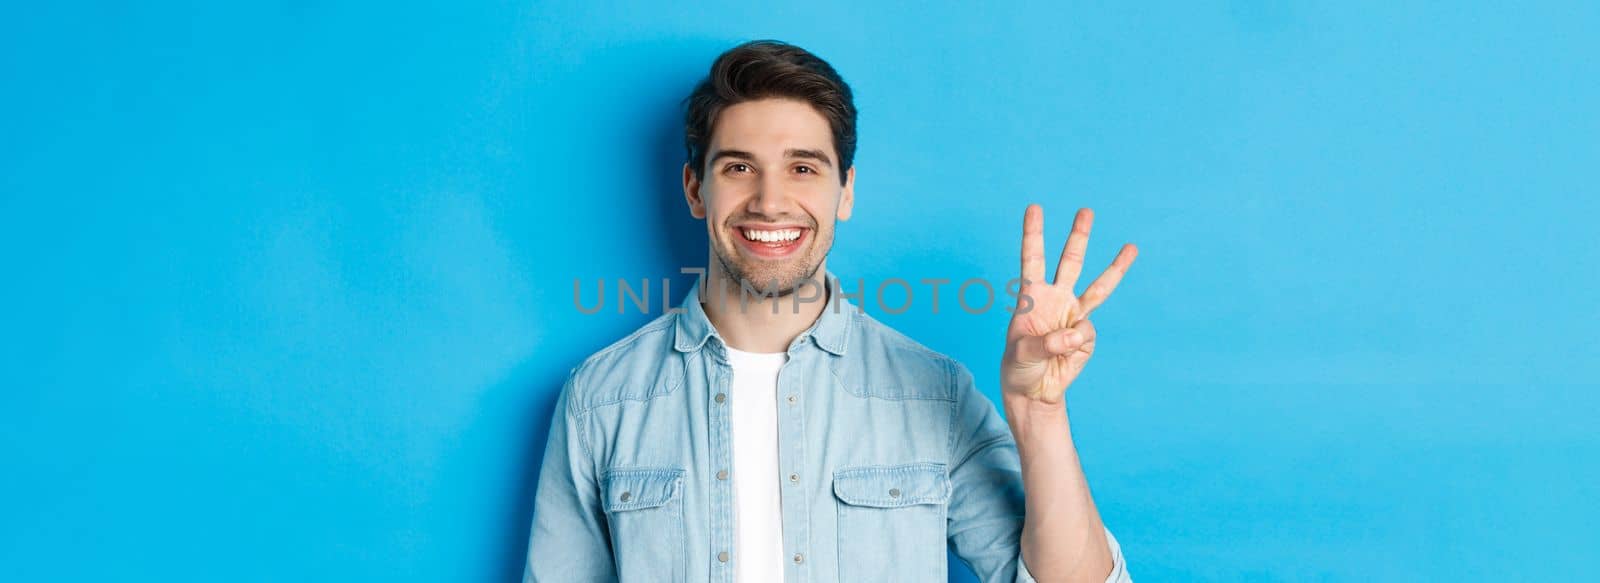 Close-up of handsome man smiling, showing fingers number three, standing over blue background.